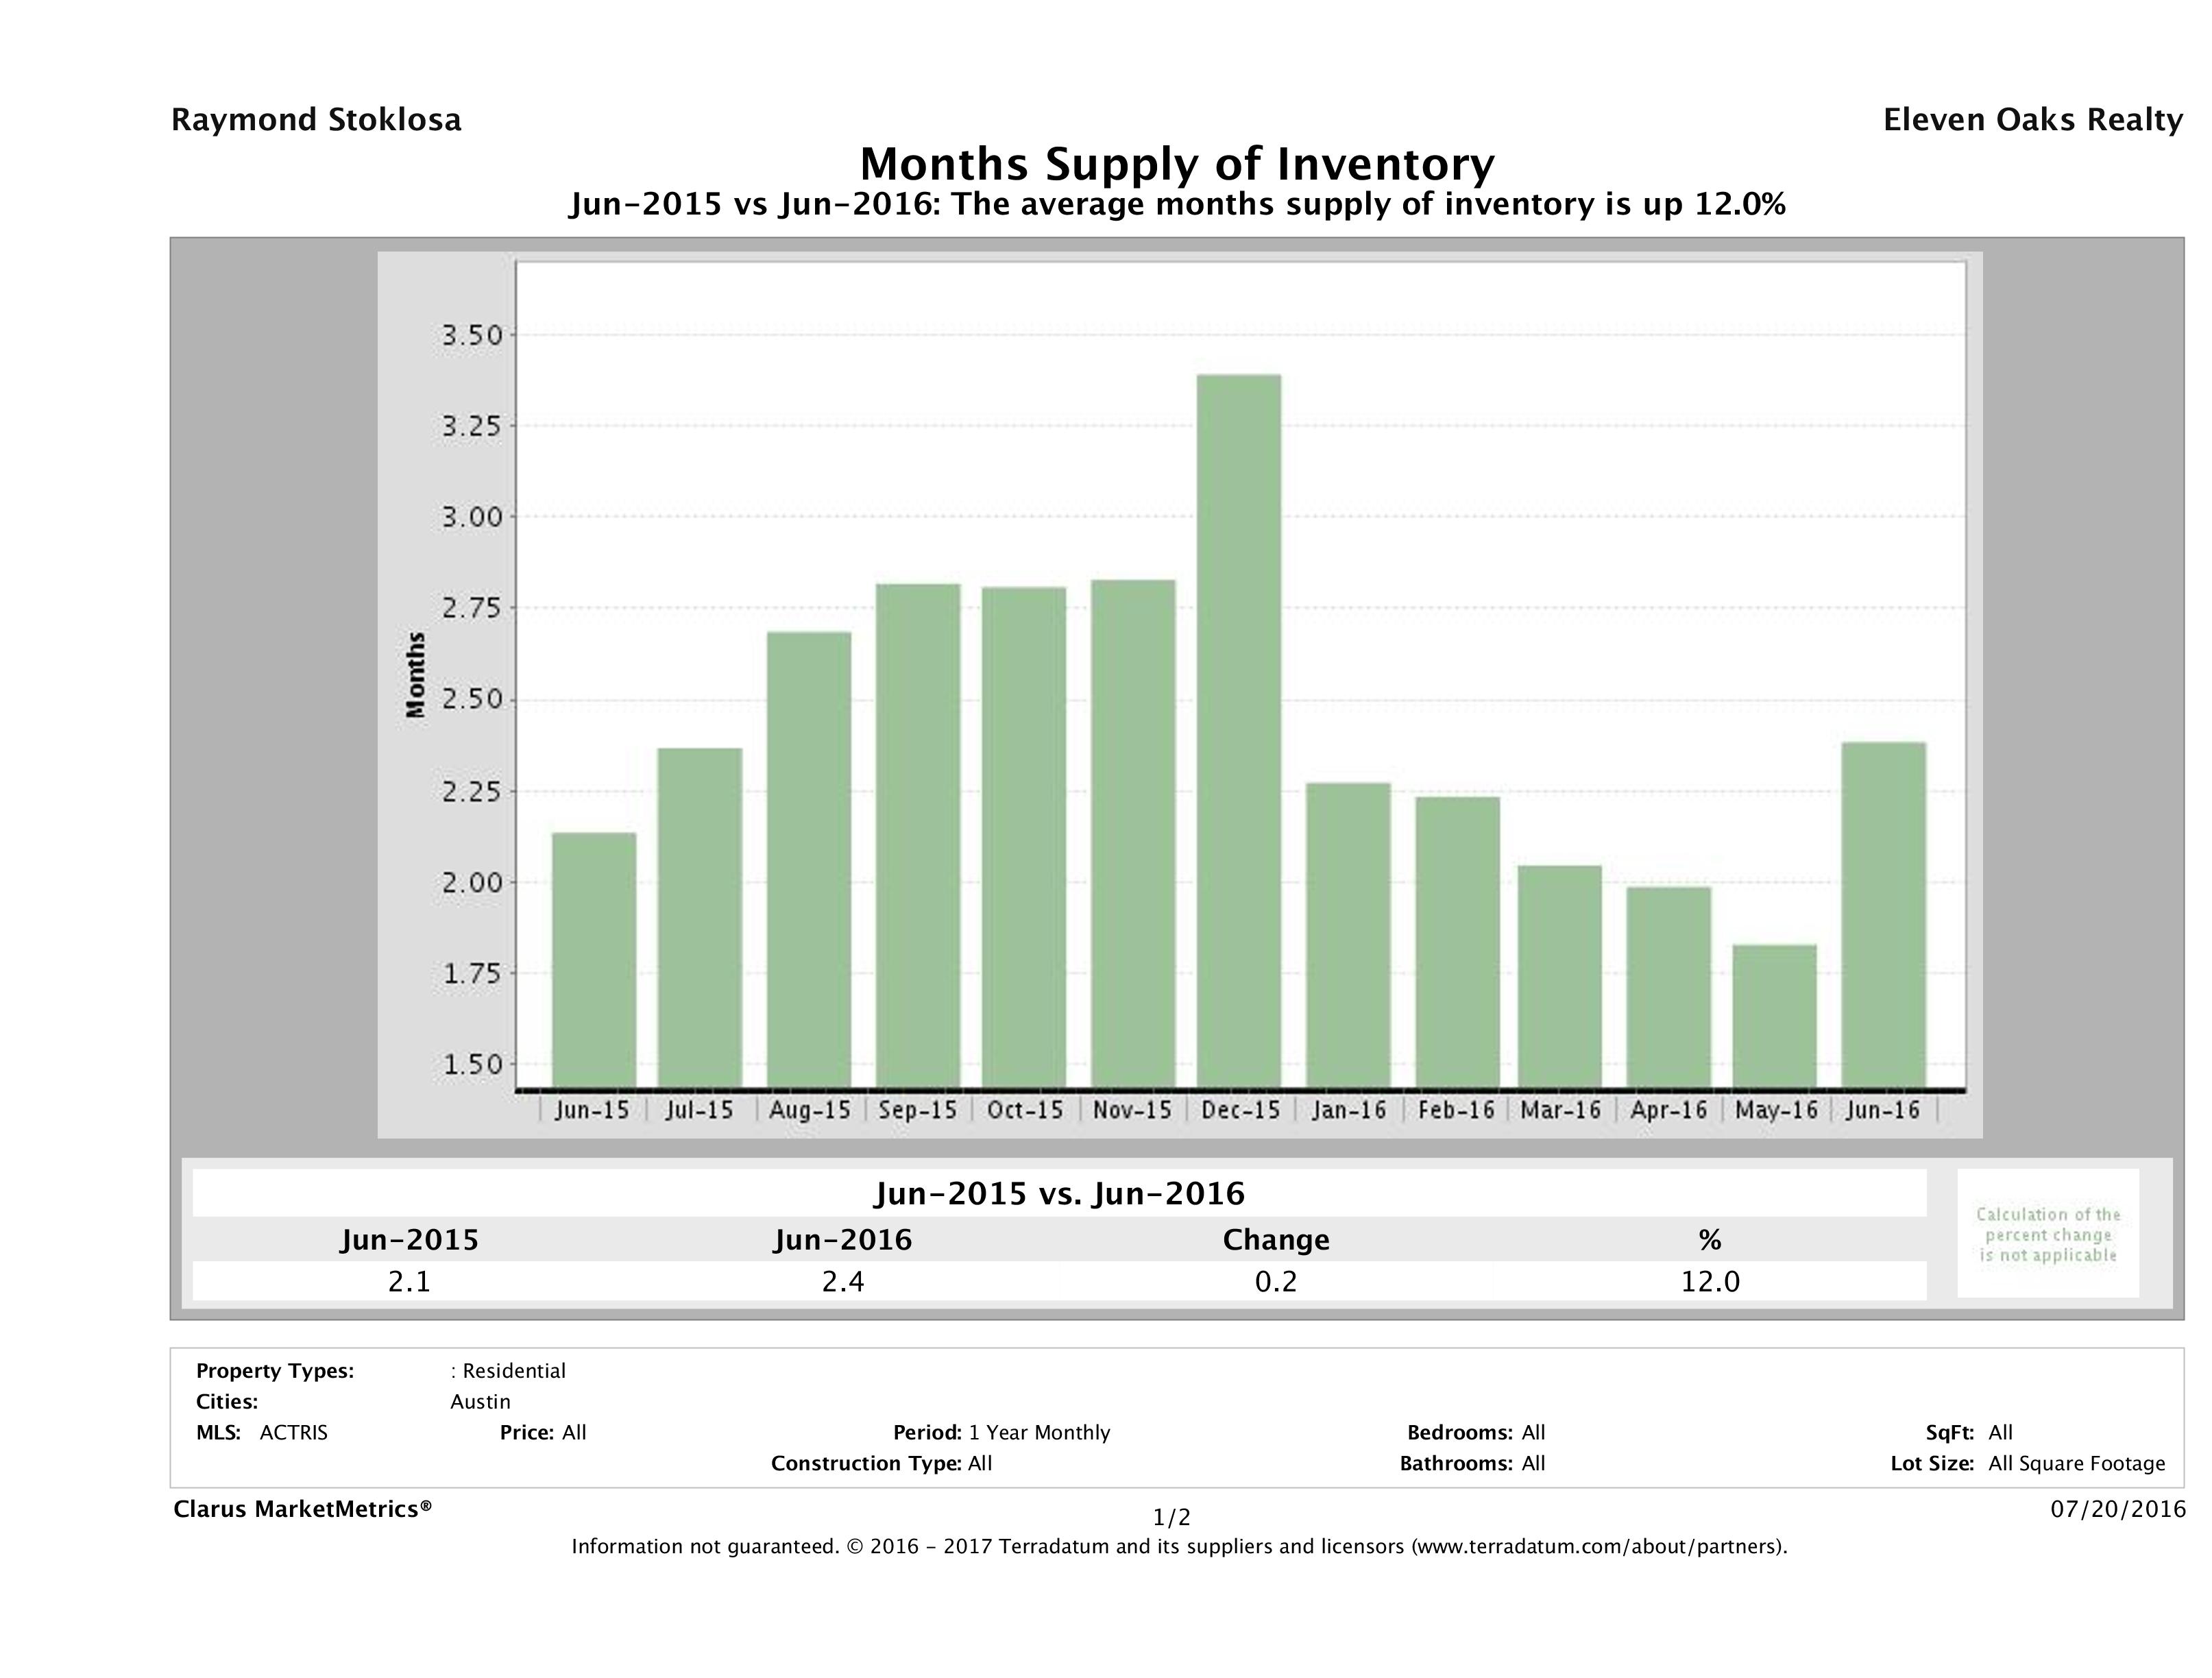 Austin single family home months inventory June 2016